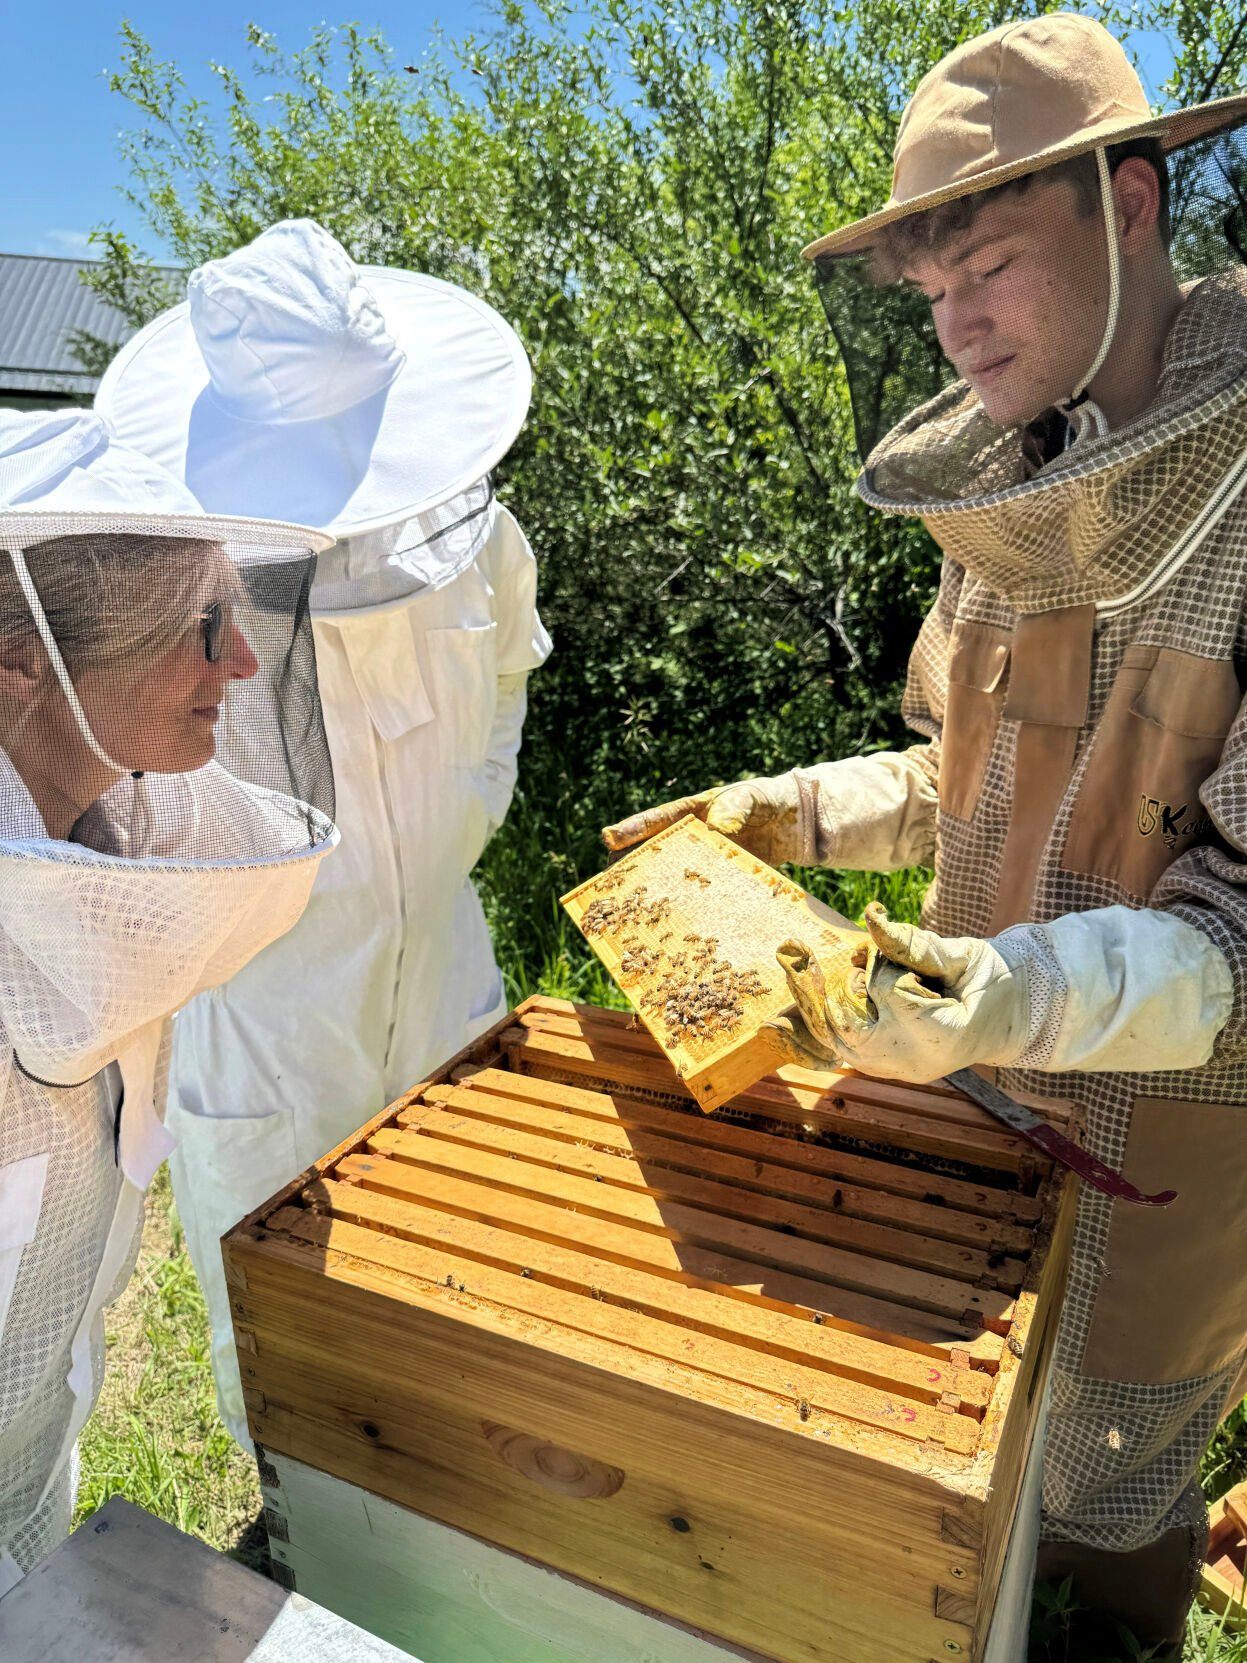 Chase Dittmar (right) completes a hive inspection during a beekeeping boot camp through Dry Creek Beekeeping in Jo Daviess County, Ill.    PHOTO CREDIT: Contributed